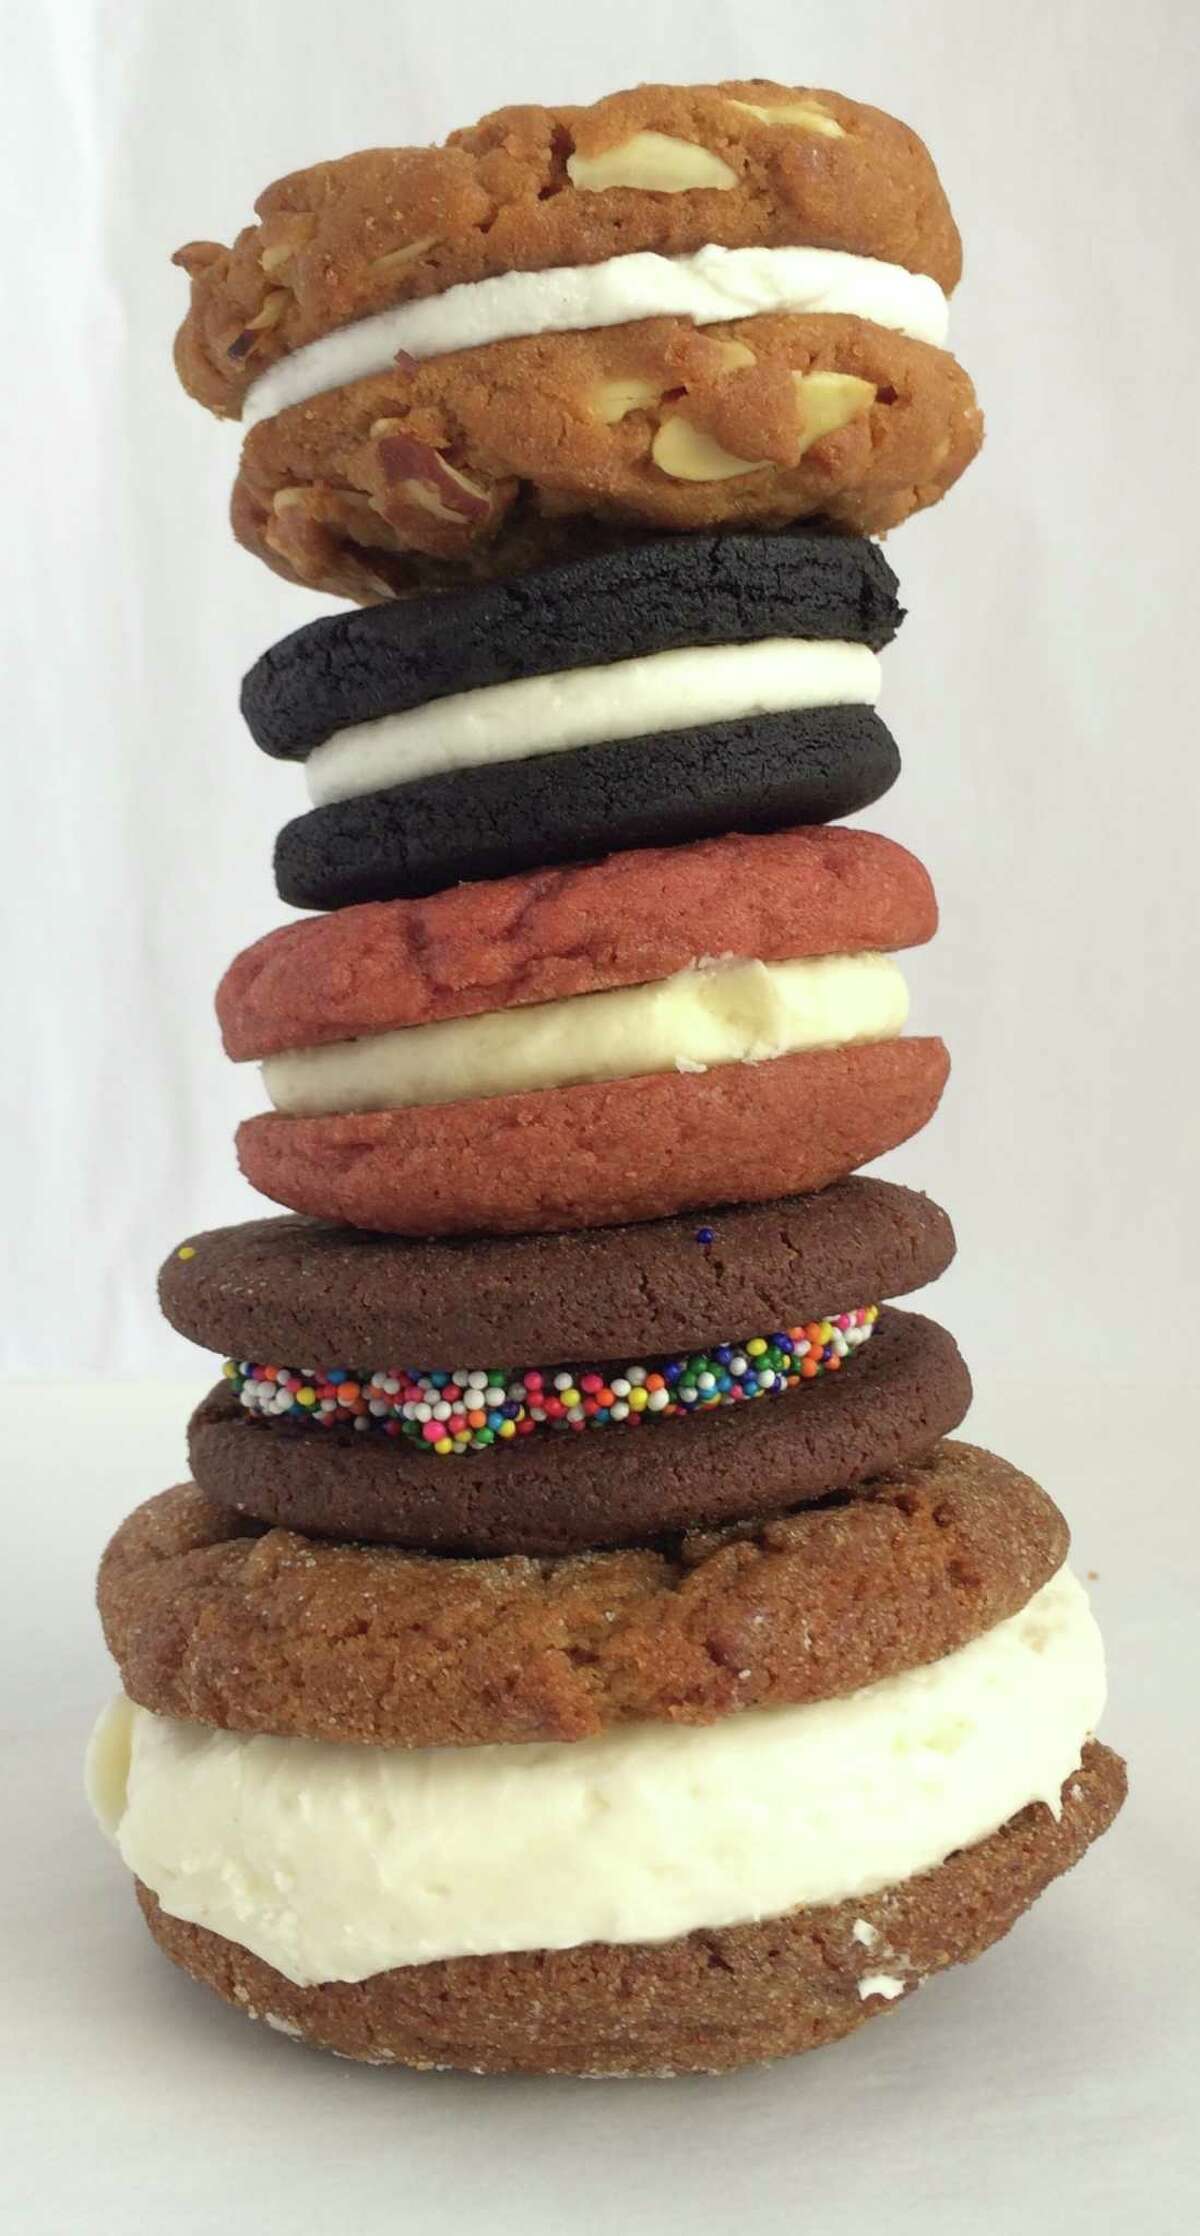 Assorted sandwich cookies from Pinkie's Bakery, Batter Bakery, Natty Cakes and Black Jet Bakery